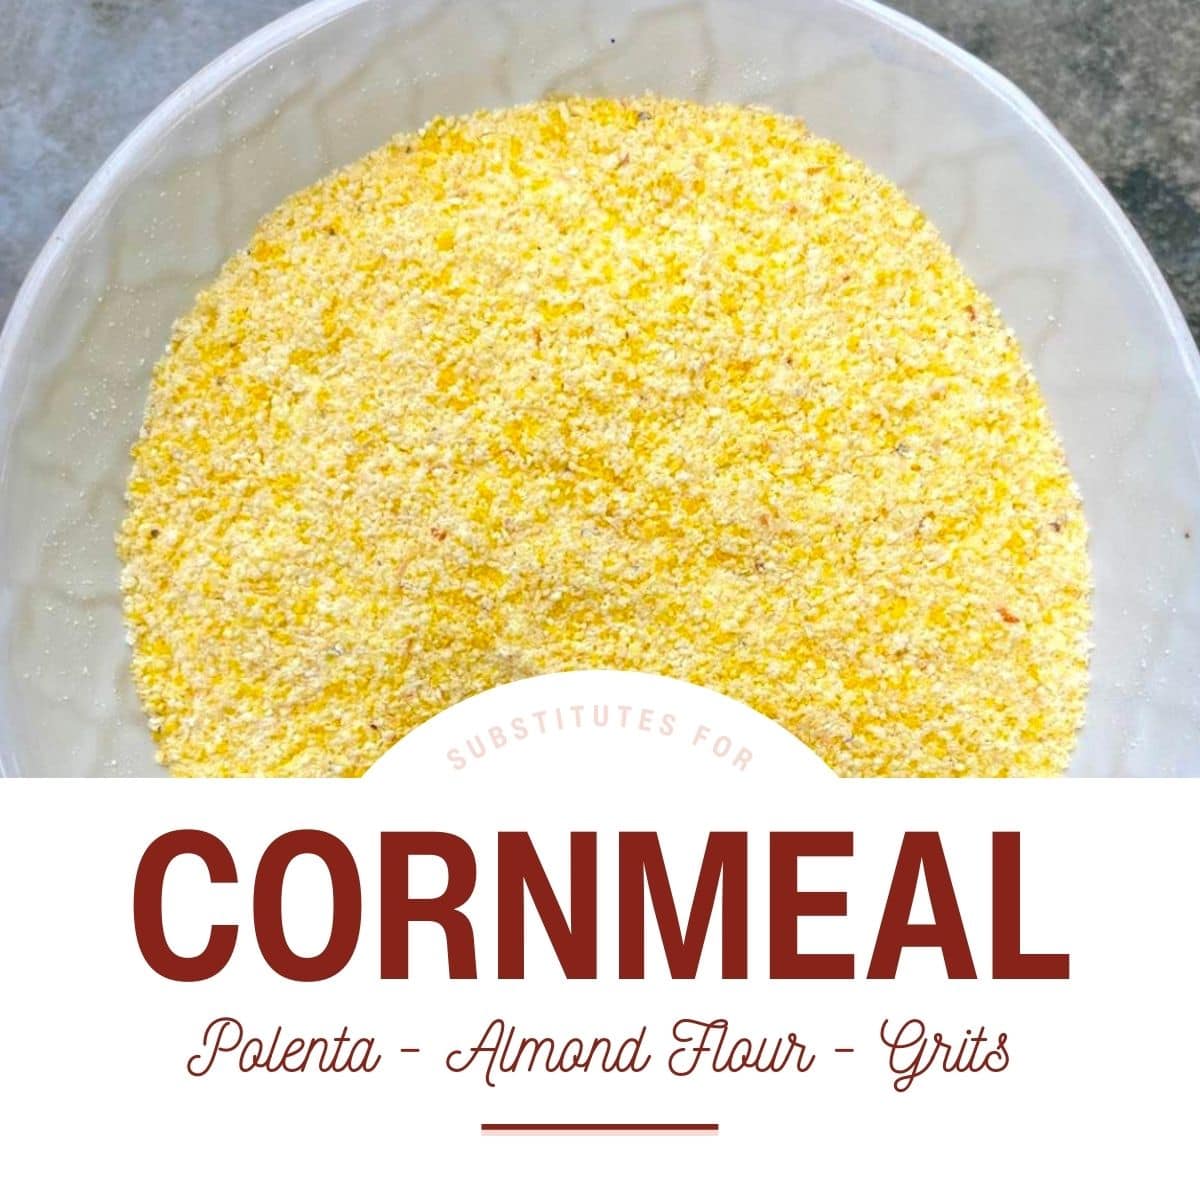 A white bowl of yellow cornmeal with text overlay that says substitutes for cornmeal.